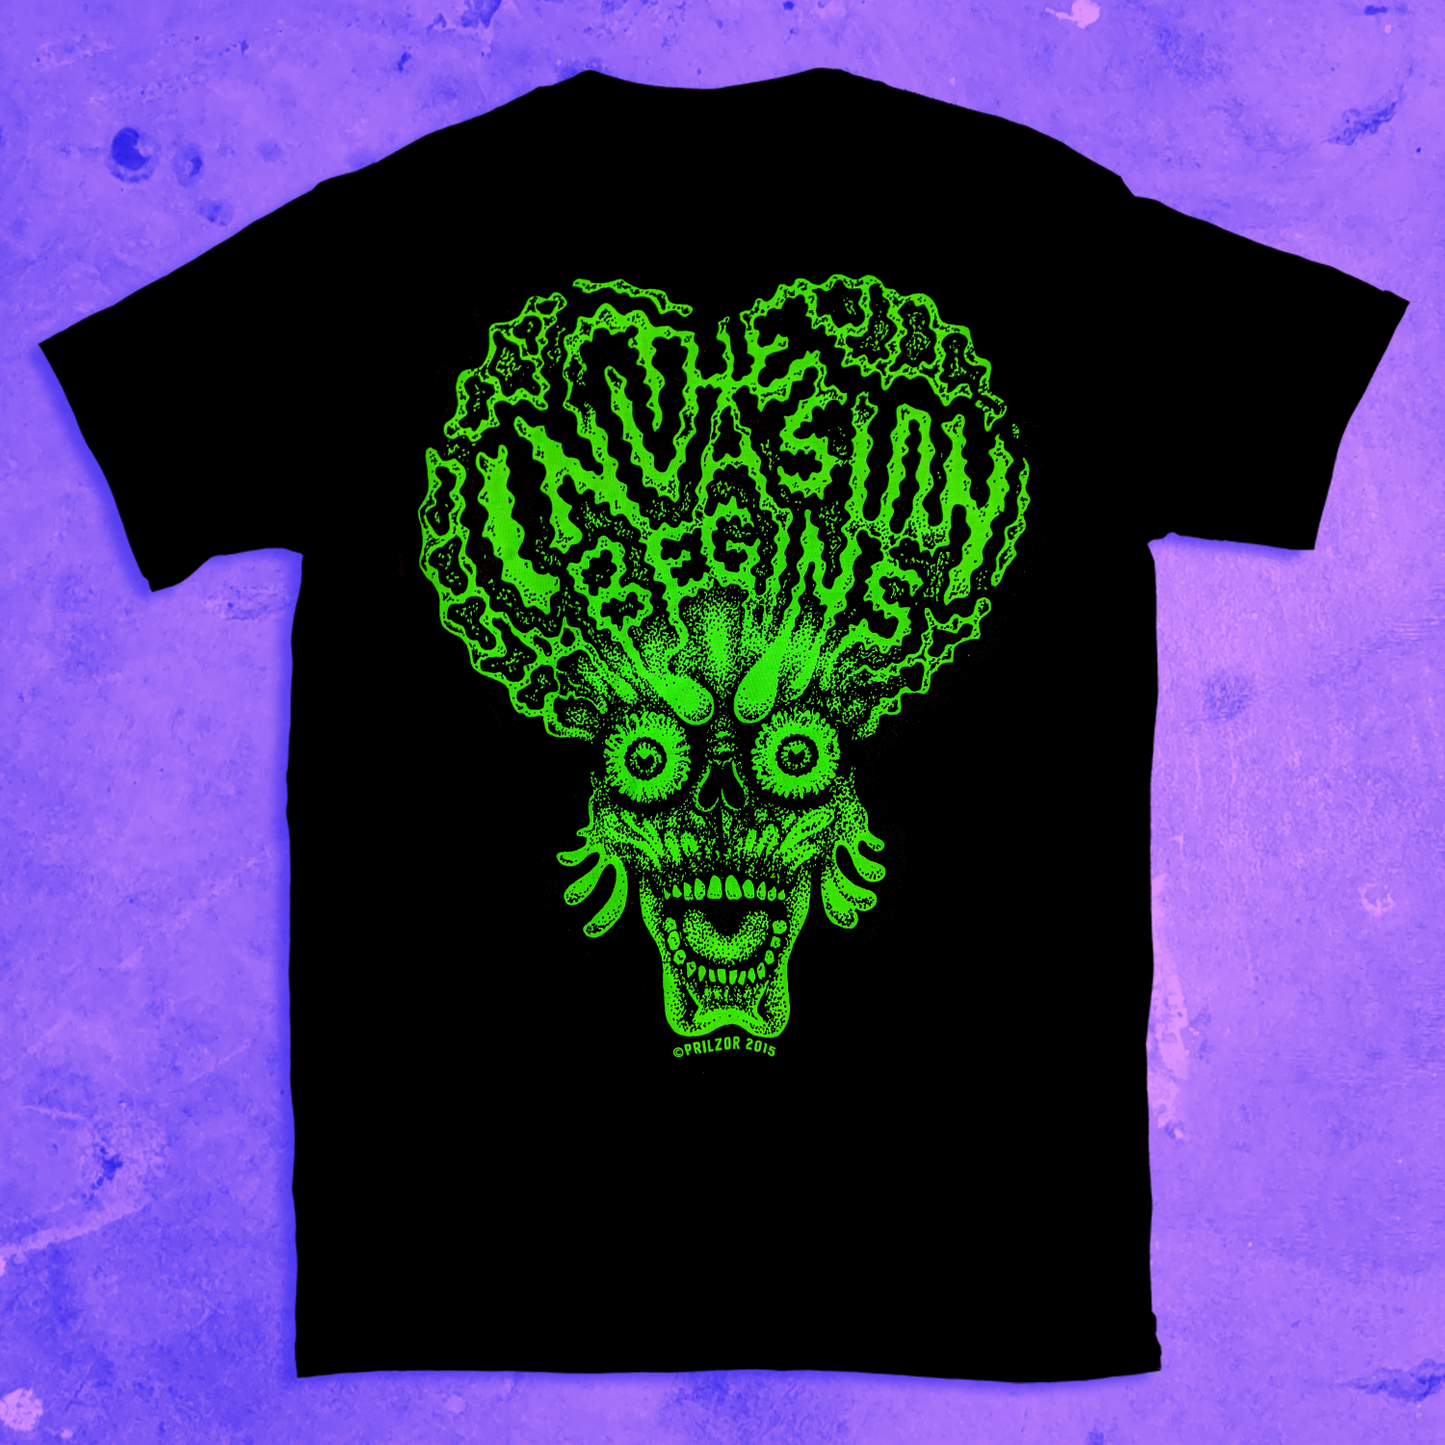 THE INVASION BEGINS T-SHIRT